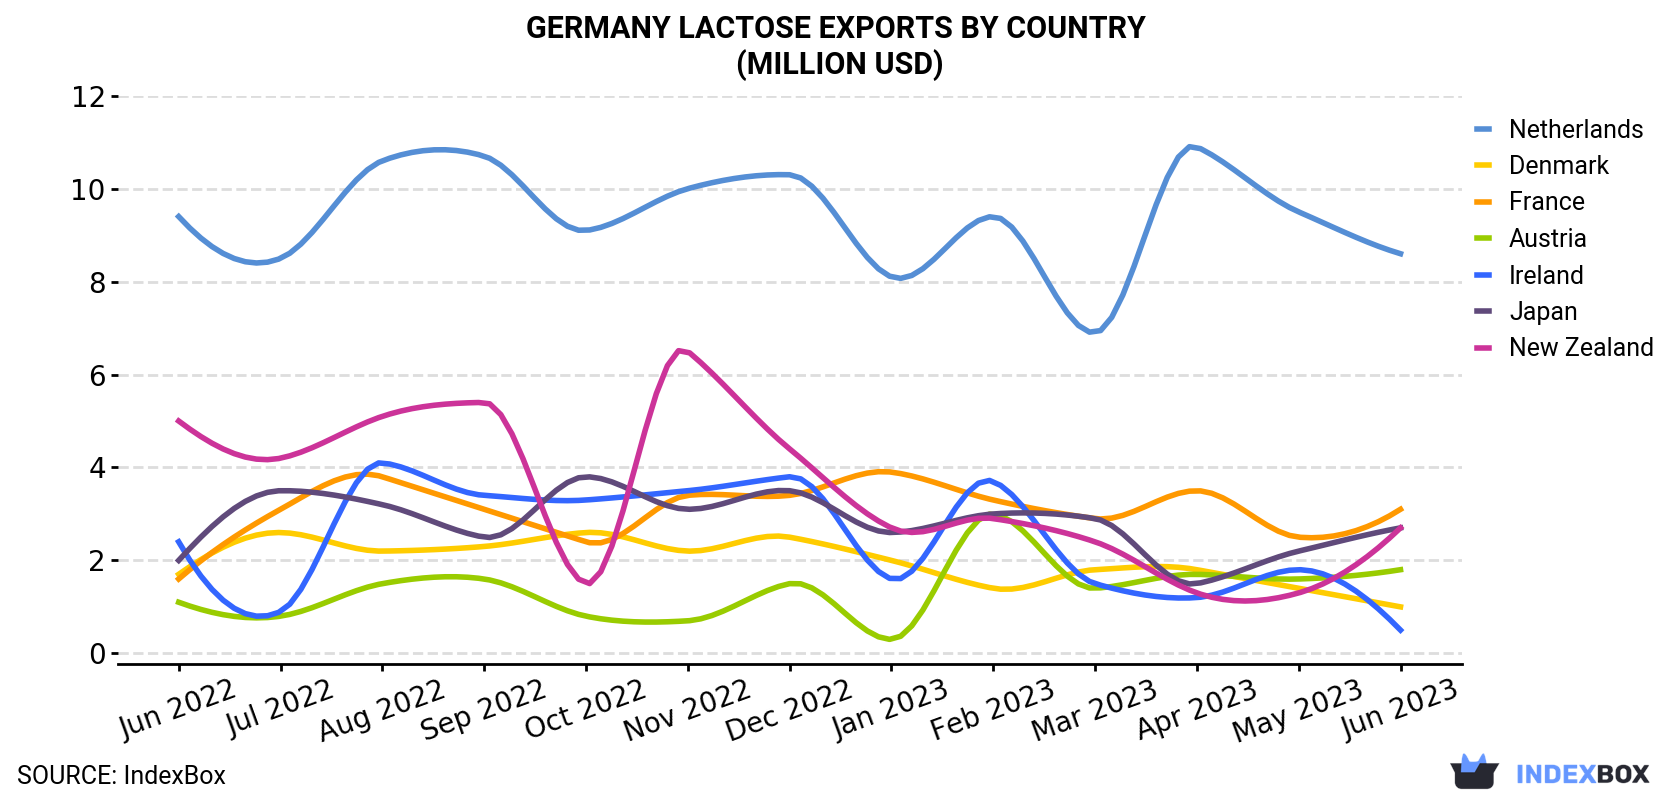 Germany Lactose Exports By Country (Million USD)